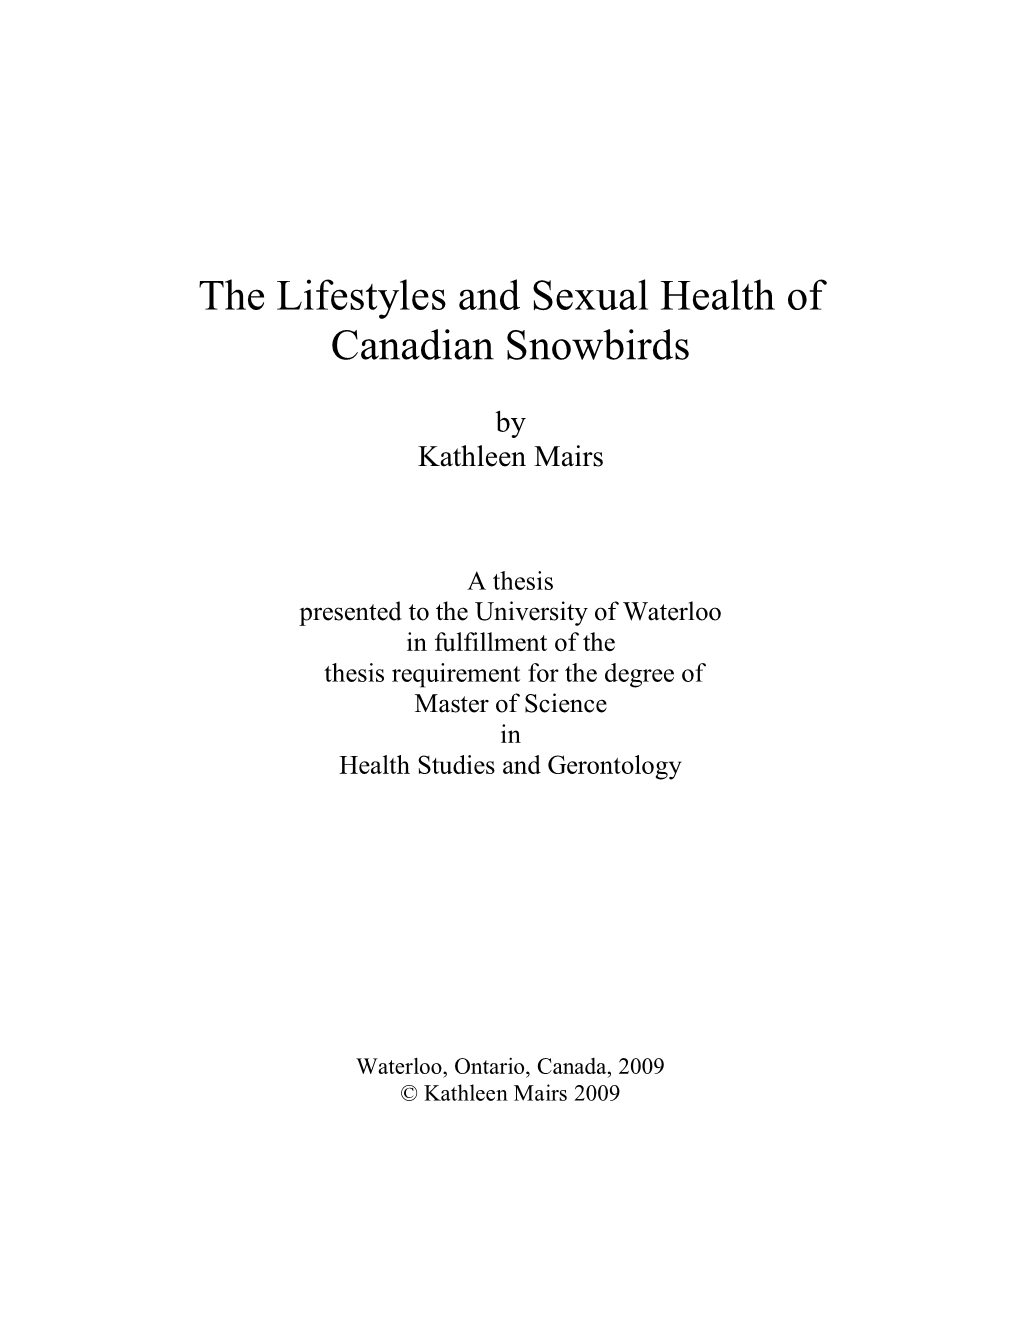 The Lifestyles and Sexual Health of Canadian Snowbirds